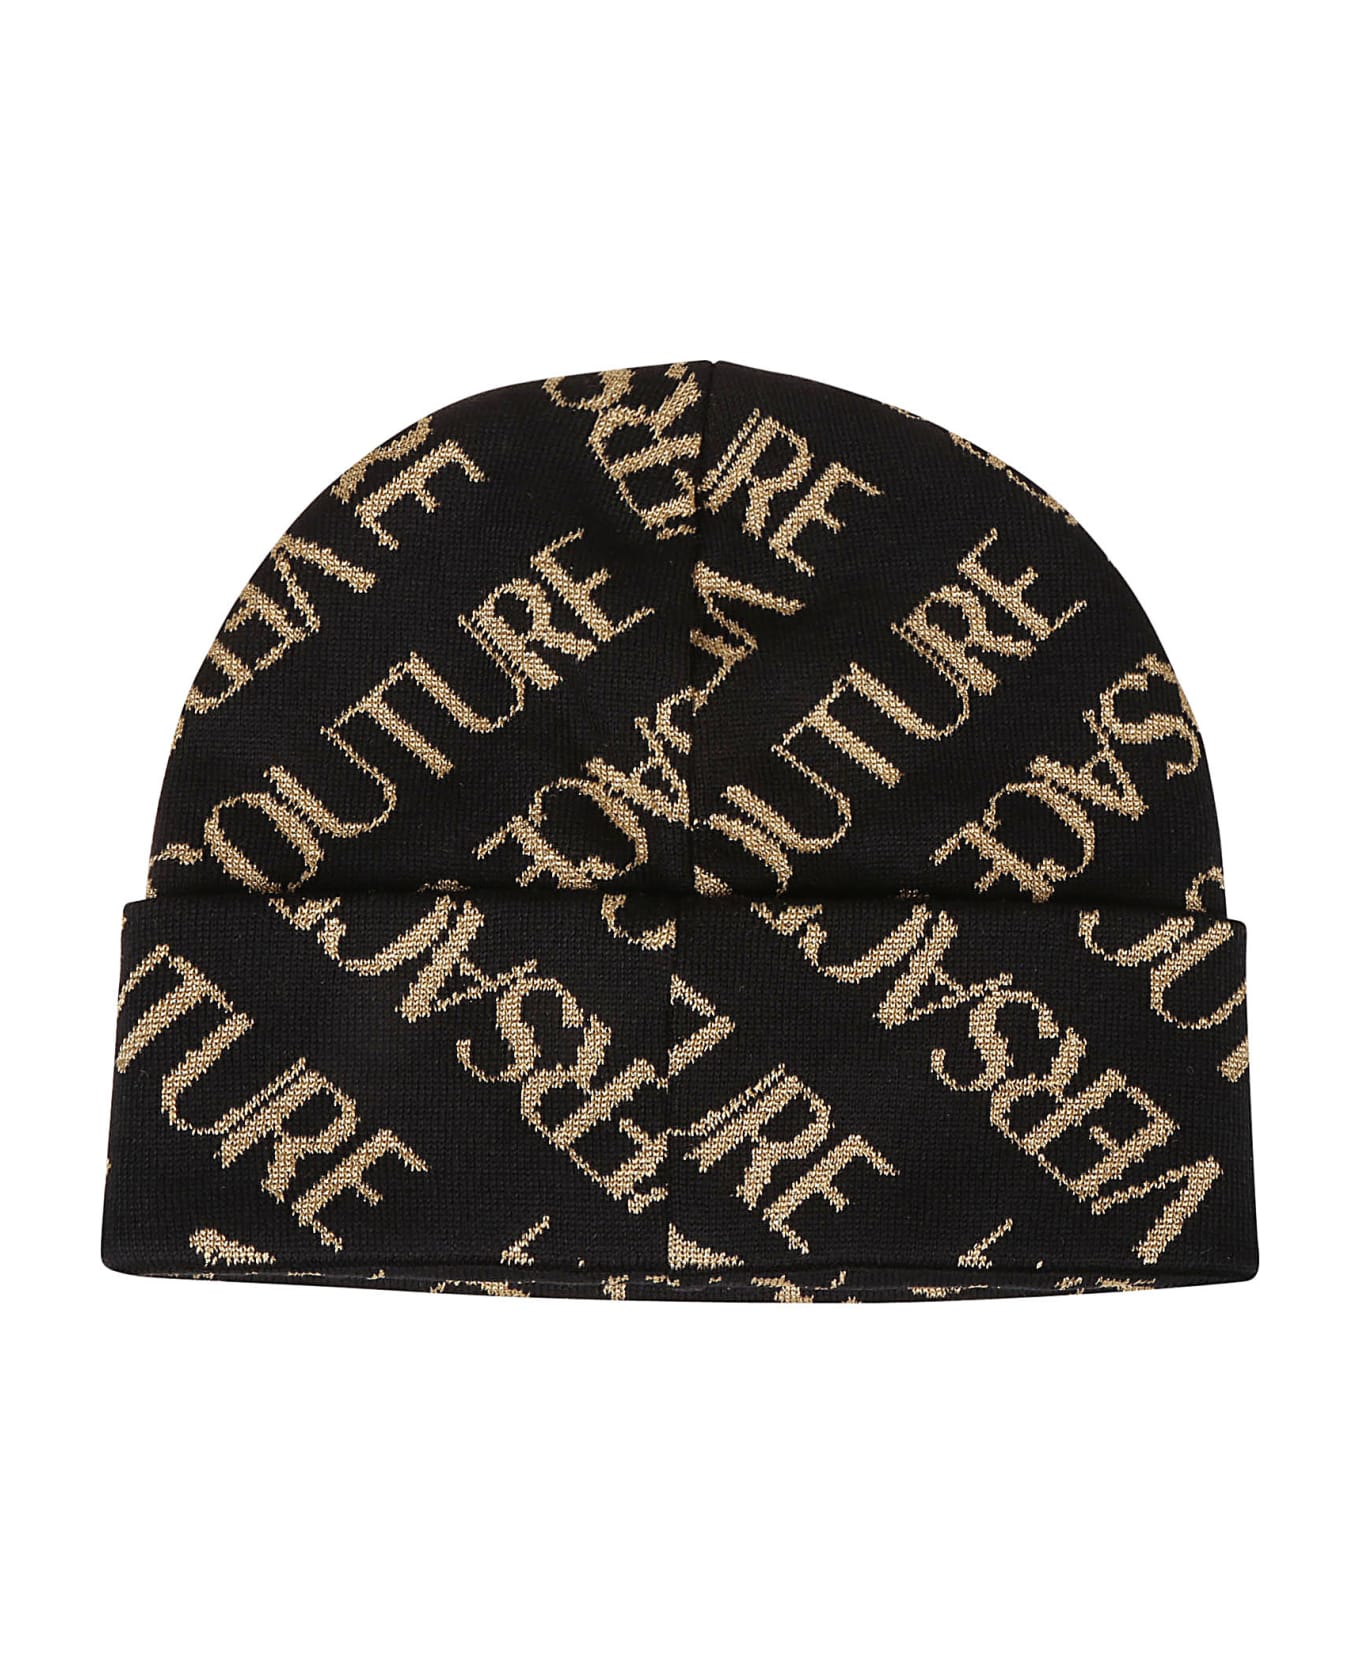 Versace Jeans Couture Logo All Over Medium Beanie - Black/gold